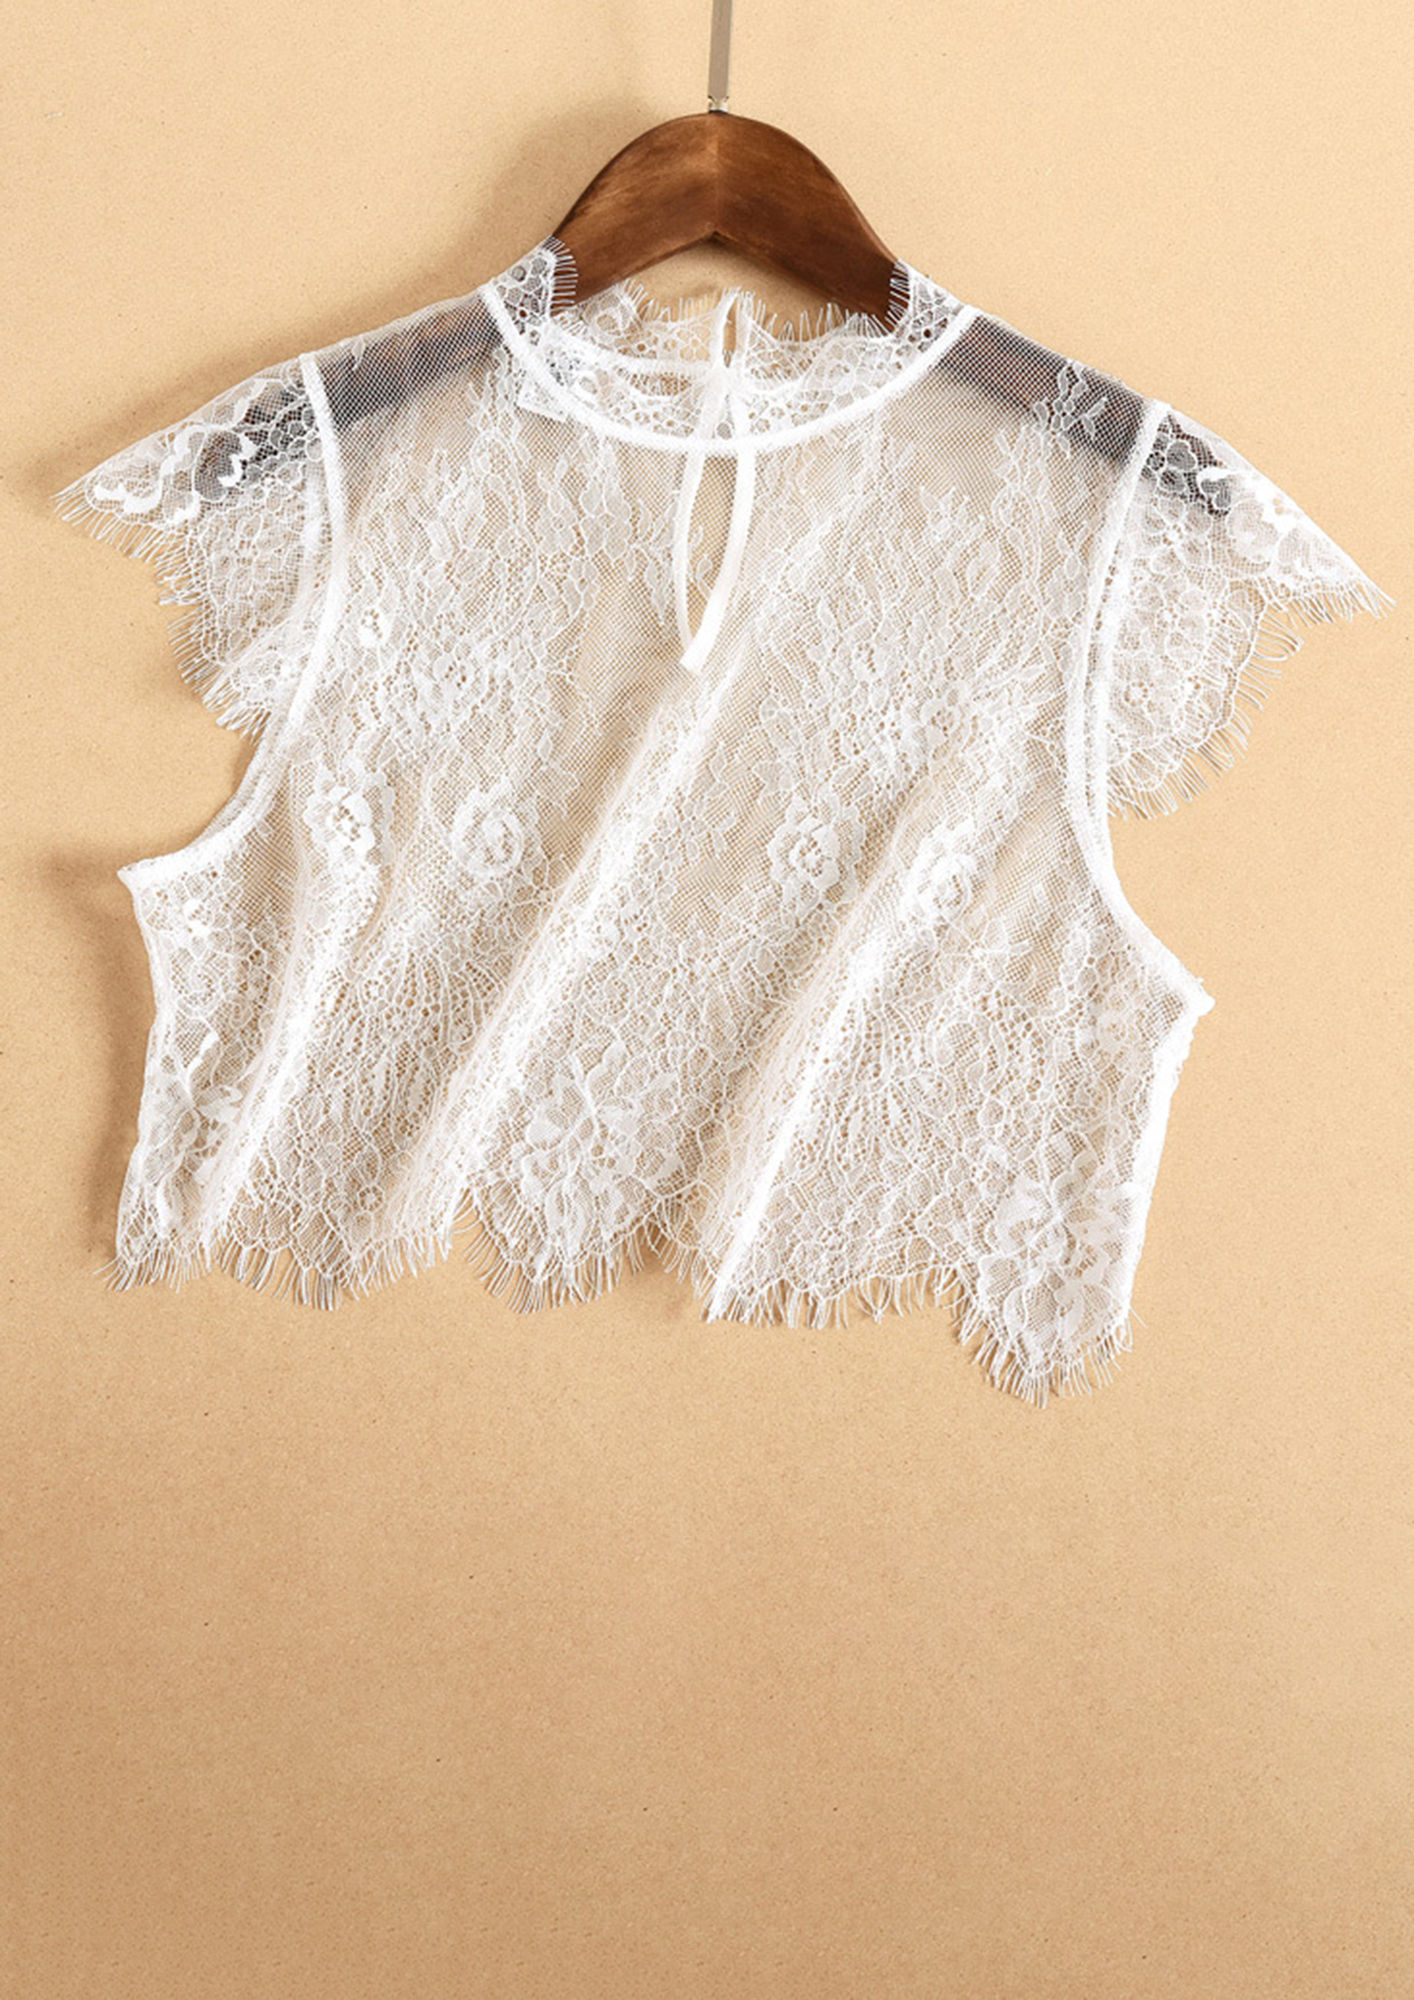 Lace White Crop Top - Buy Lace White Crop Top online in India